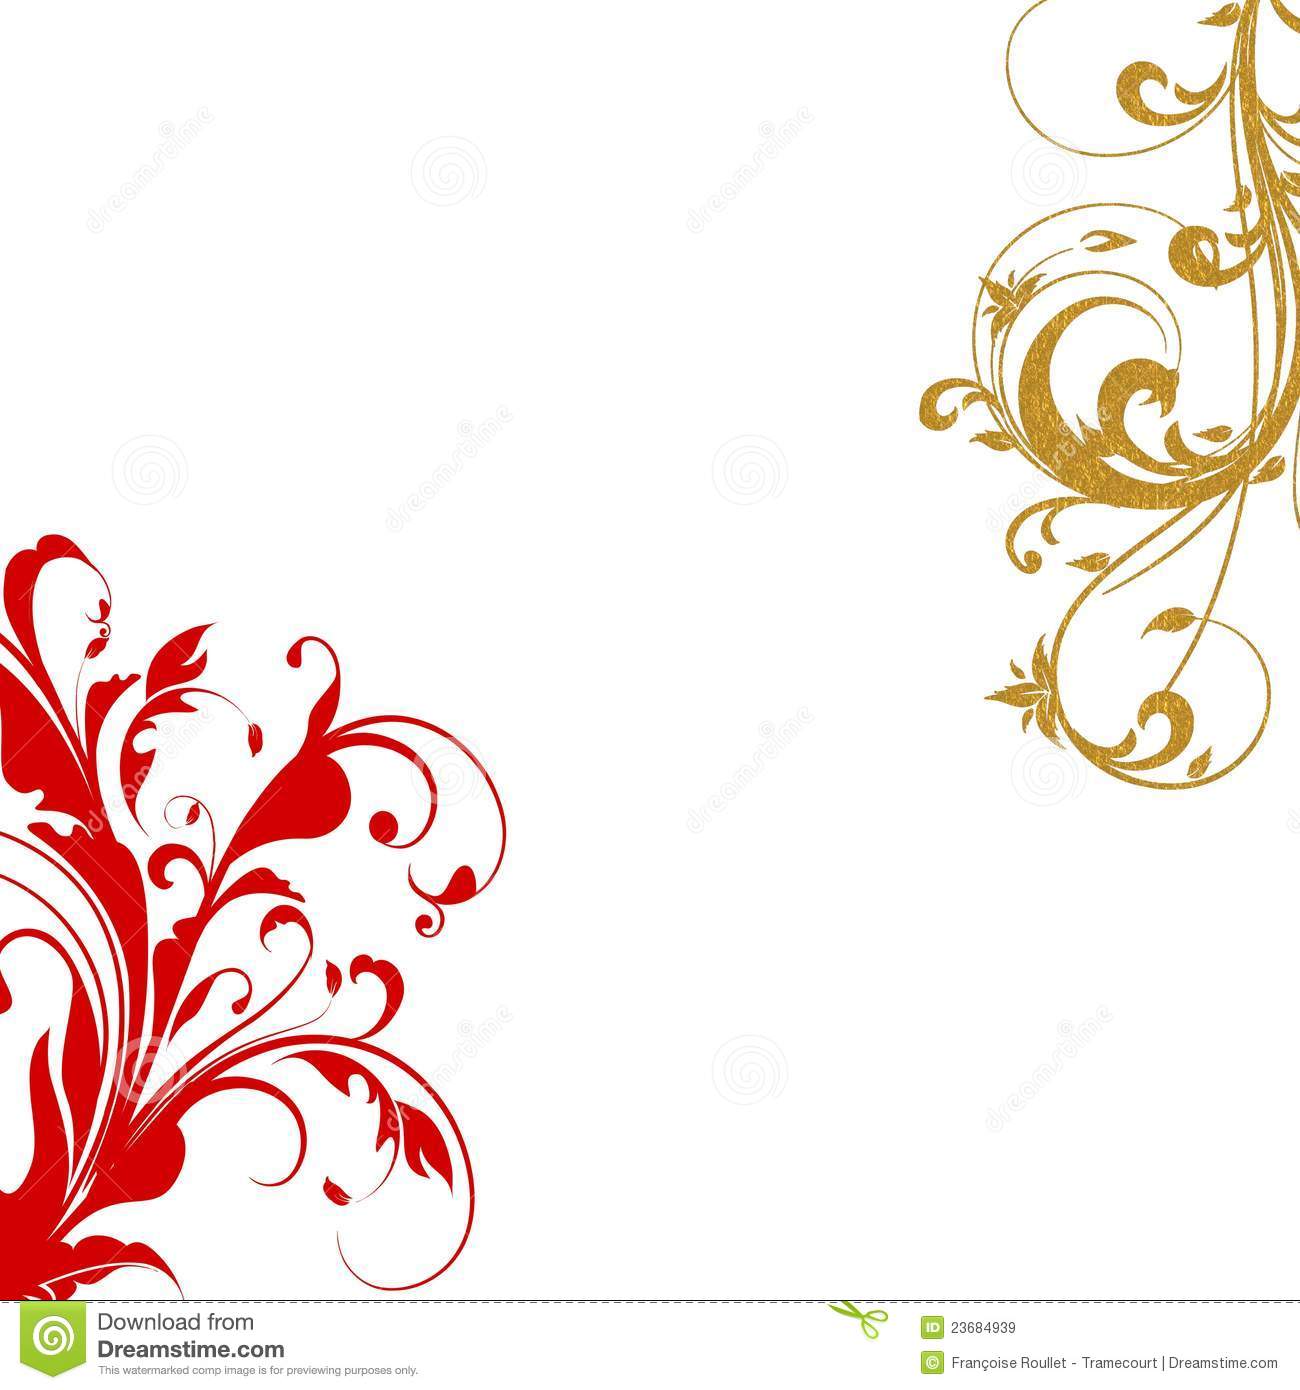 Red gold clipart.